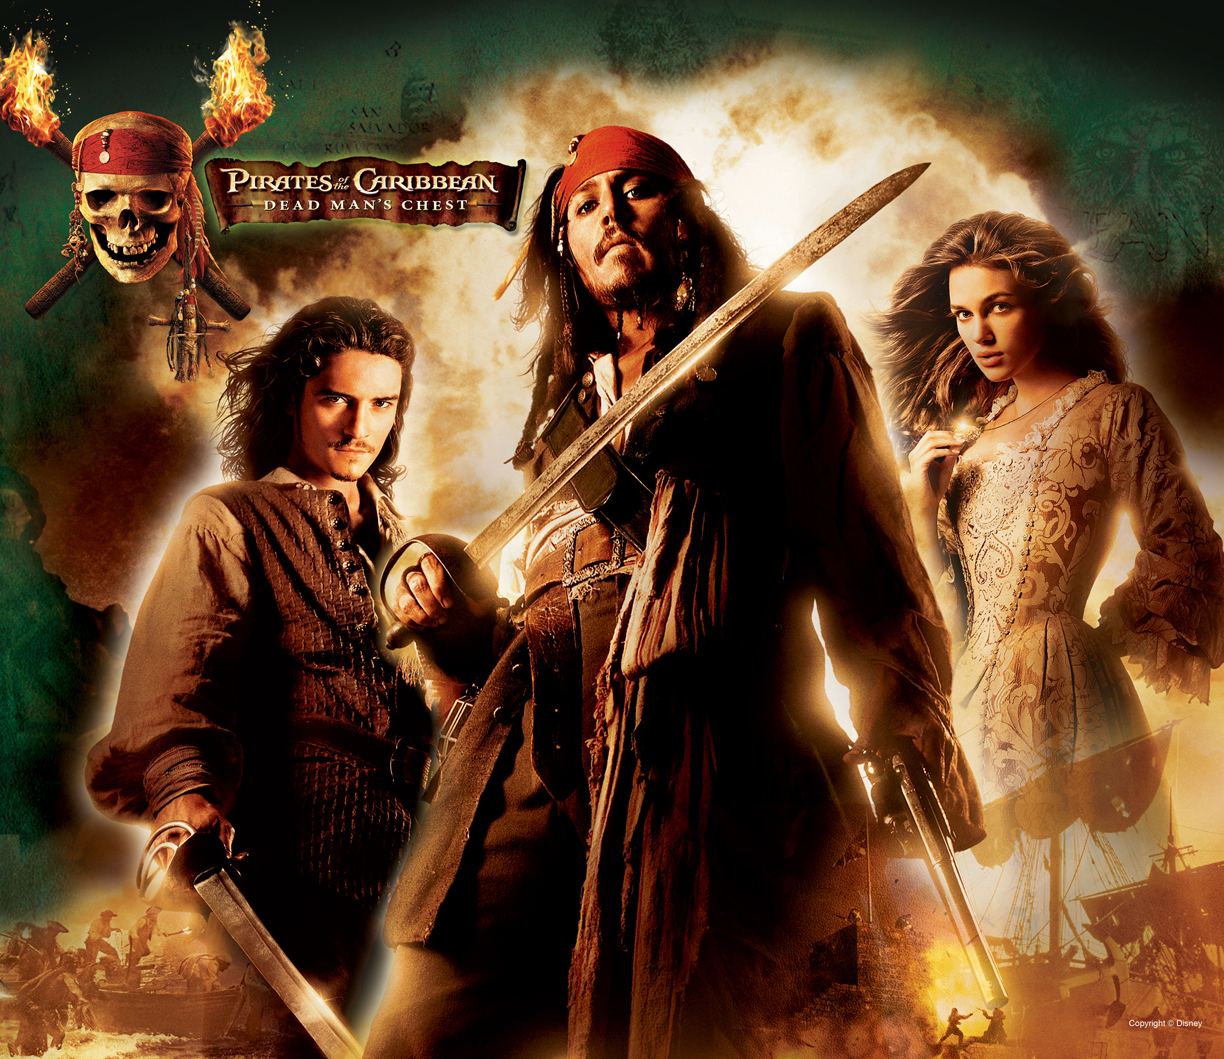 potc wallpaper,movie,poster,mythology,fictional character,action film